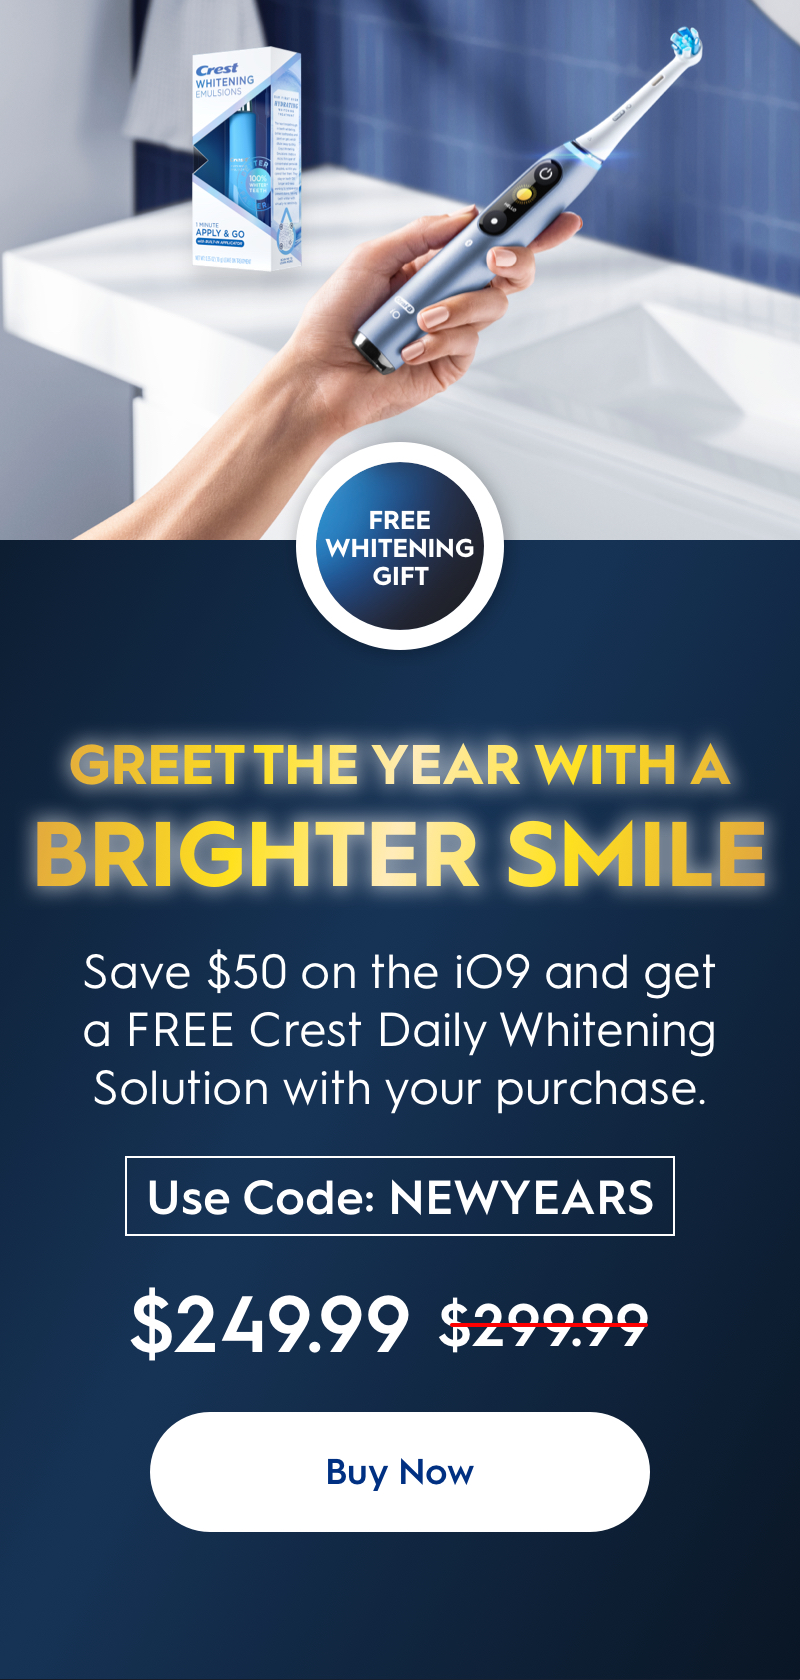 https://cdn11.bigcommerce.com/s-2idmiil7bp/product_images/uploaded_images/oral-b-homepage-m-010424-011024-io9-gwp-newyears-2xv2.jpg